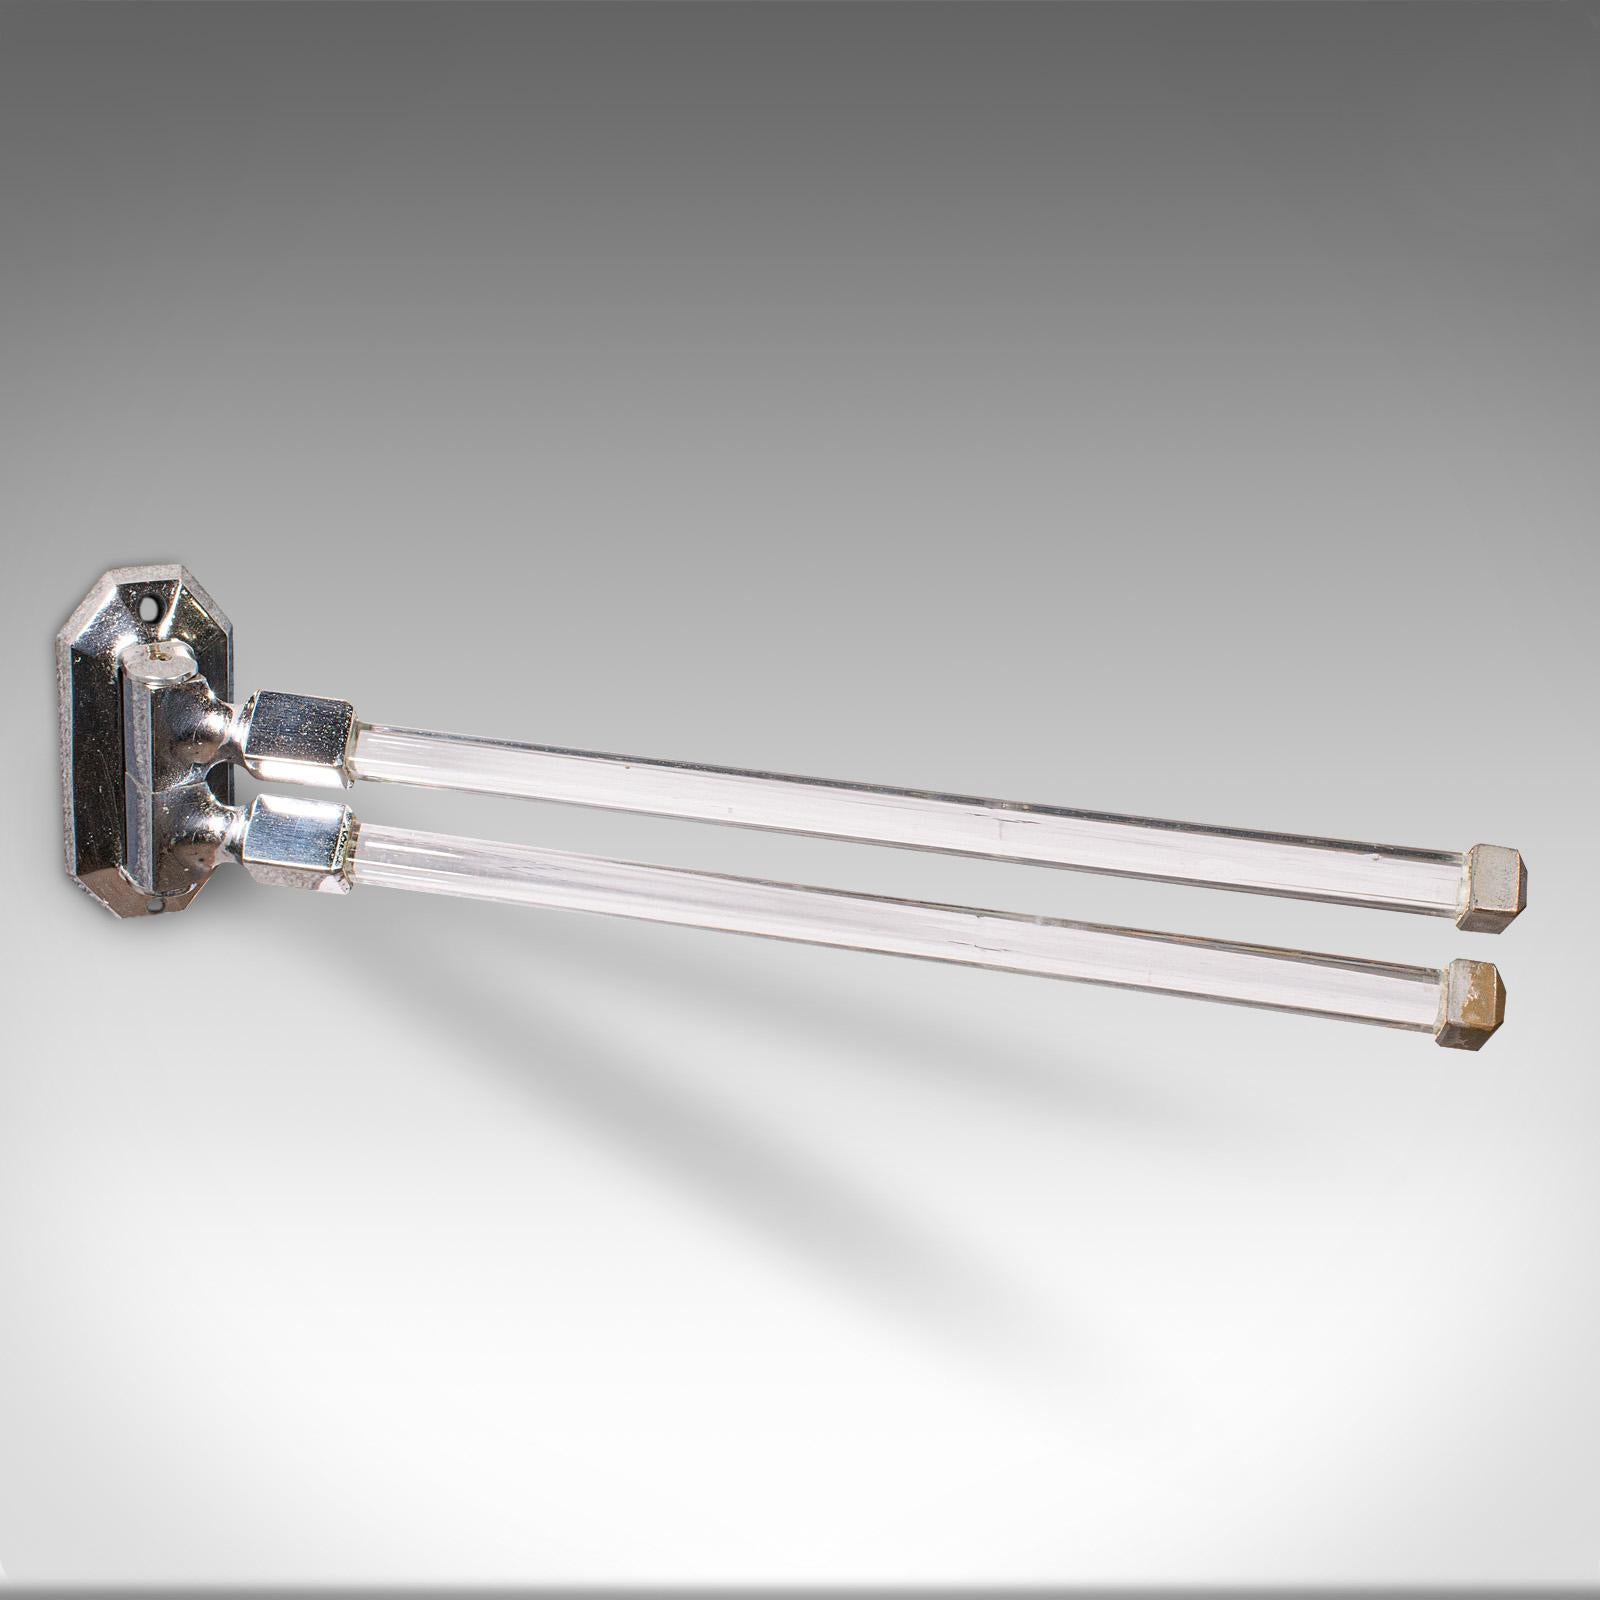 Vintage Wall Mounted Towel Rail, English, Glass, Chrome, Valet, Art Deco, C.1930 For Sale 2